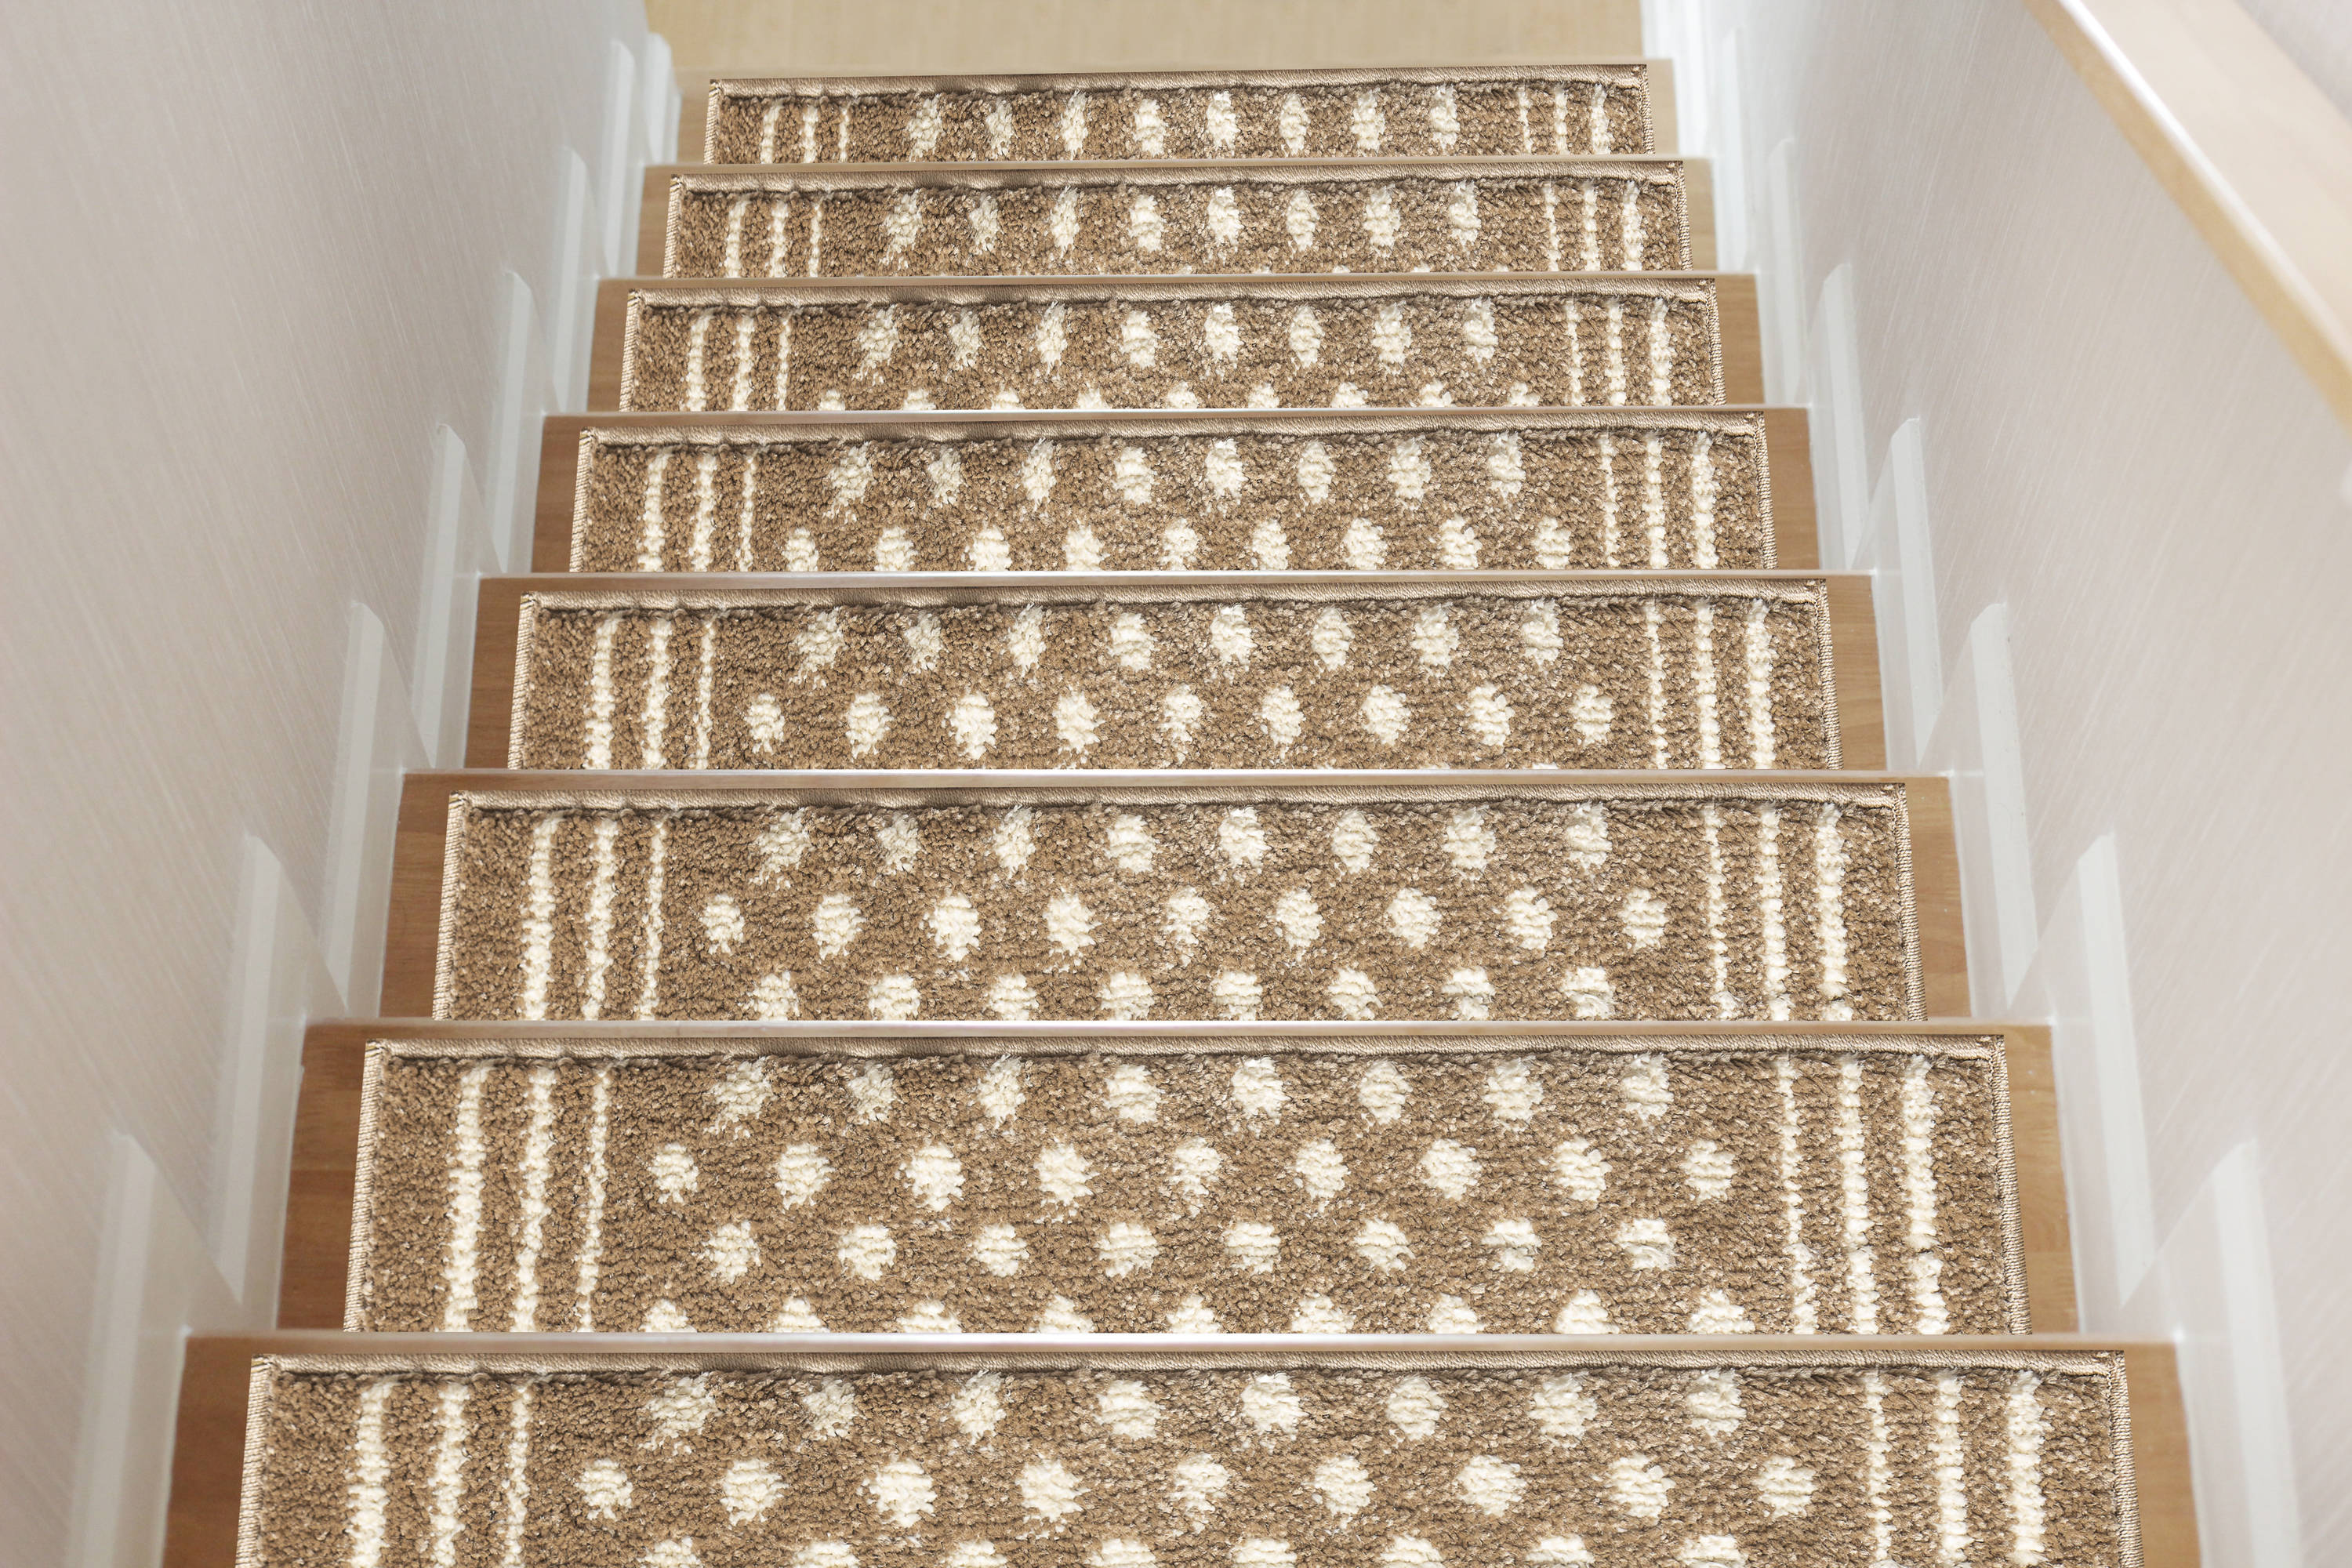 Sofia Rugs Stair Treads Includes Double Sided Adhesive Tape Stair Rugs for Dogs Meadow Set of 13 Stair Treads Carpet Non Slip Stair Runners for Wooden Steps Stair Treads Carpet 